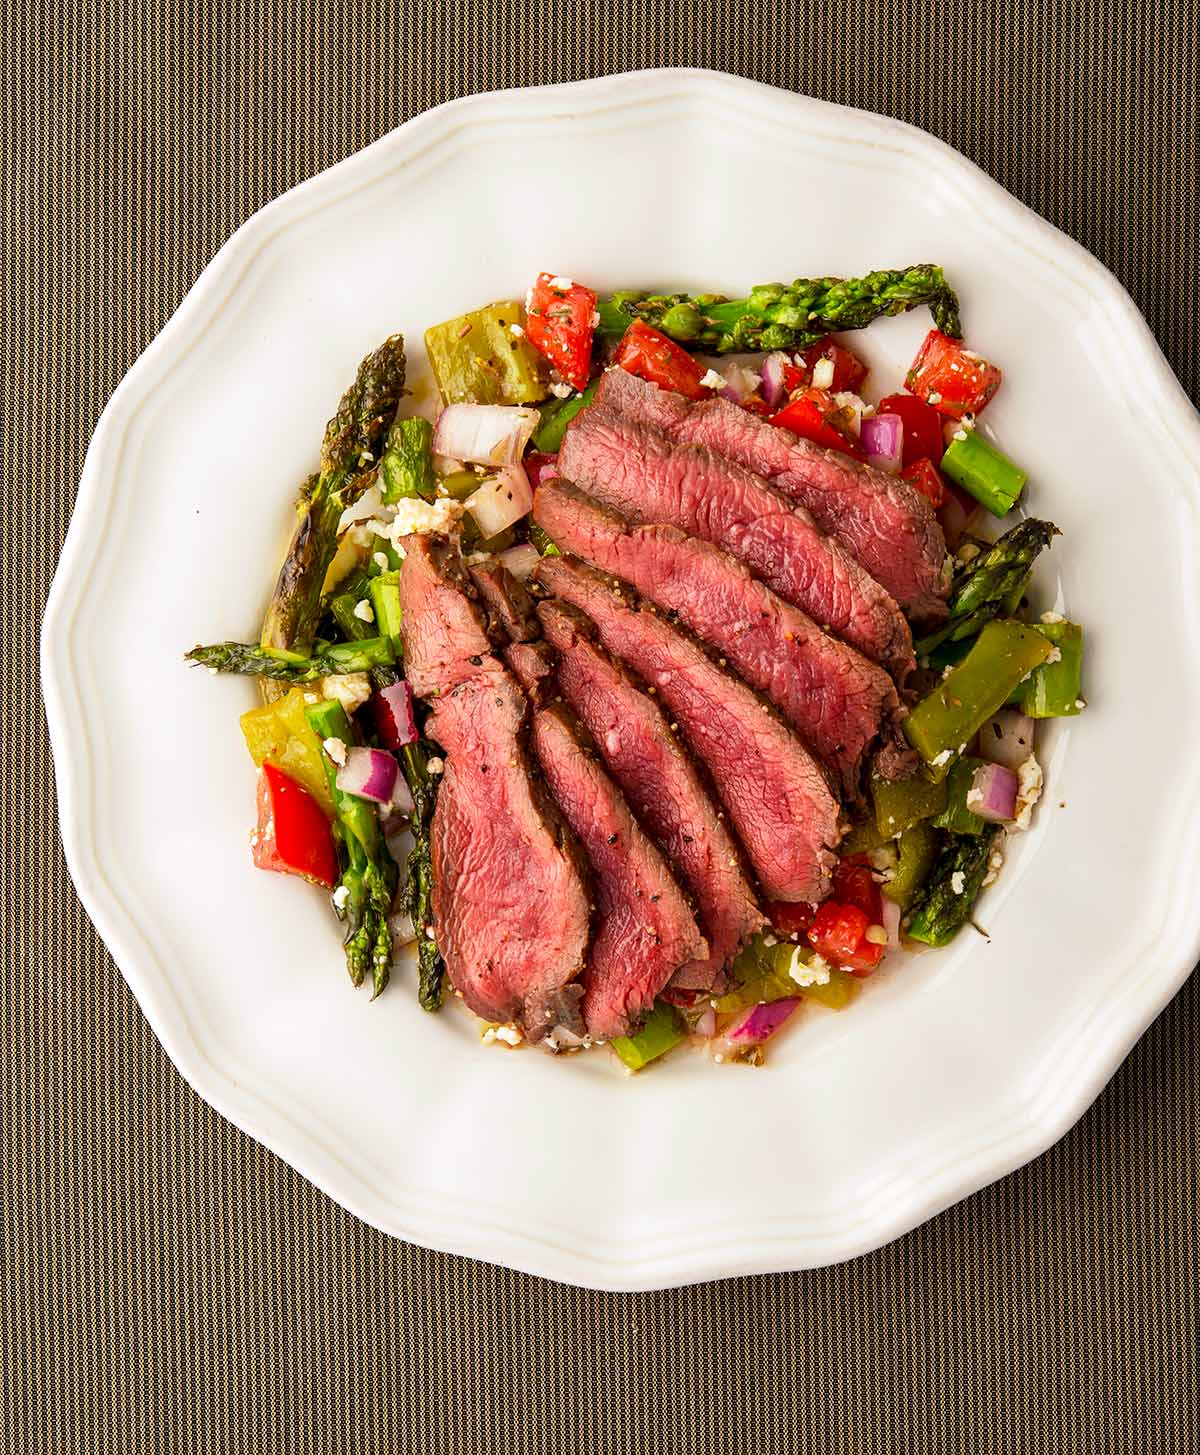 WHAT TO SERVE WITH GRILLED VENISON